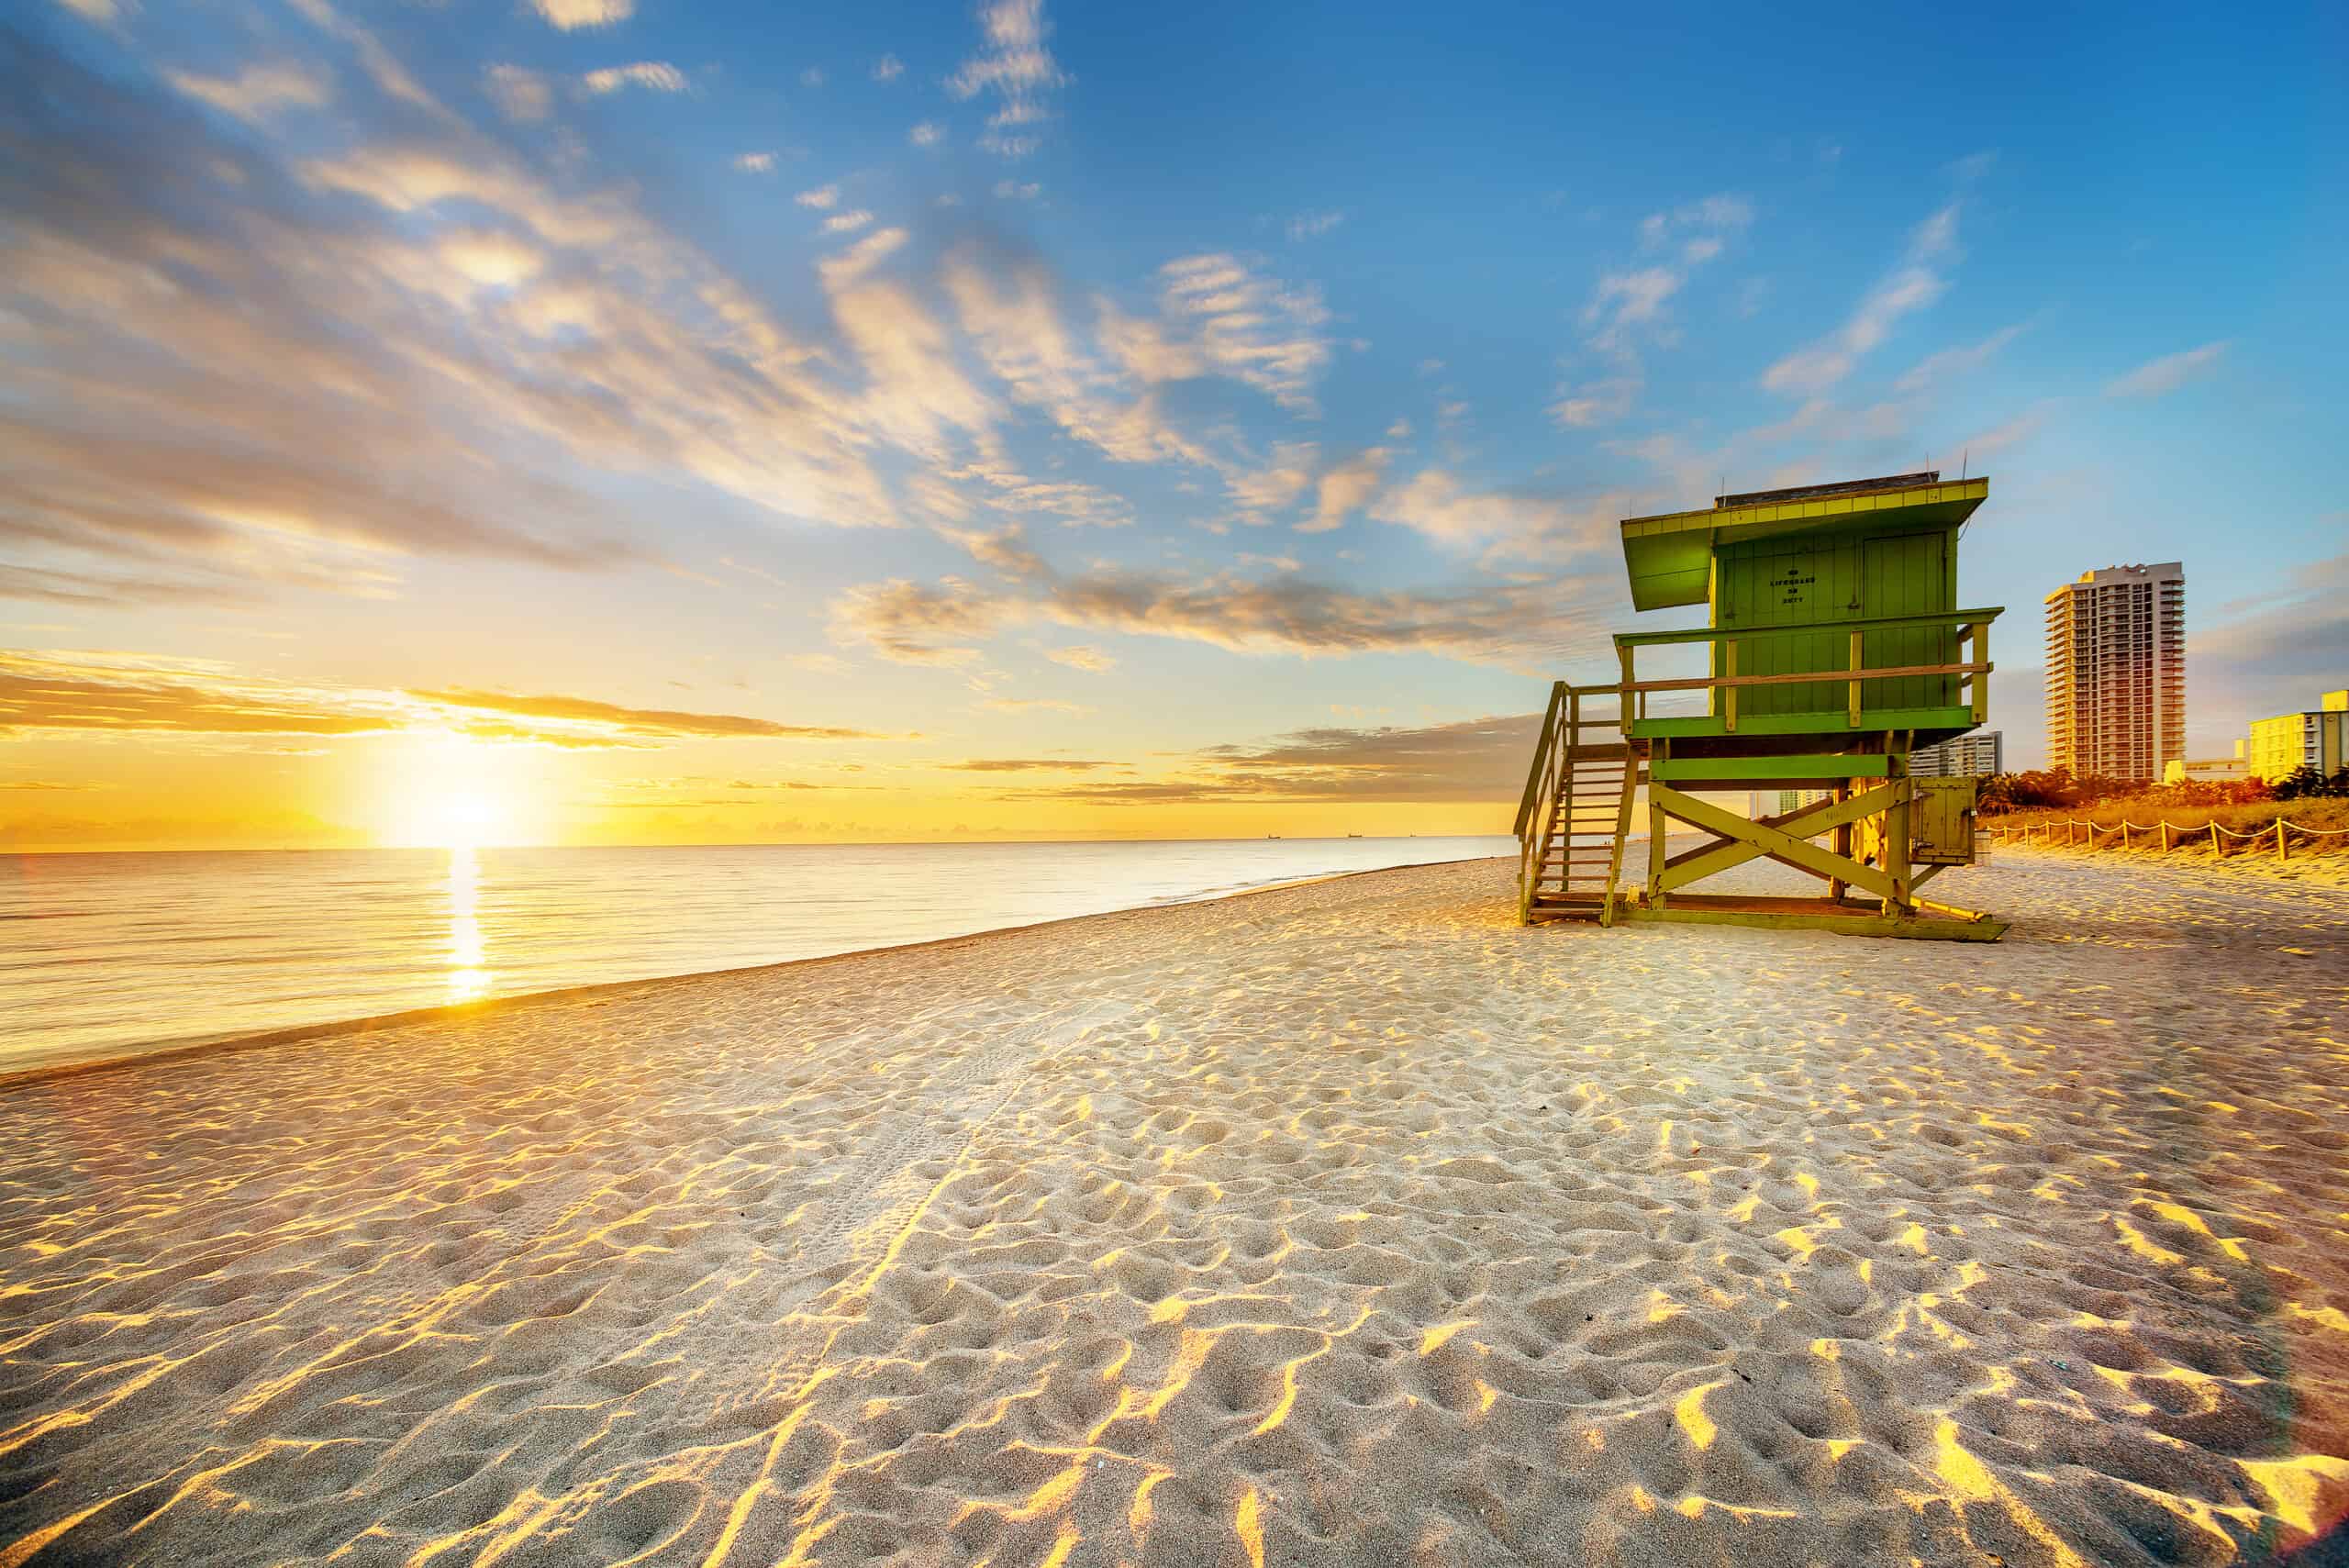 Glowing sunrise over Miami Beach, the white sands and a green lifeguard station